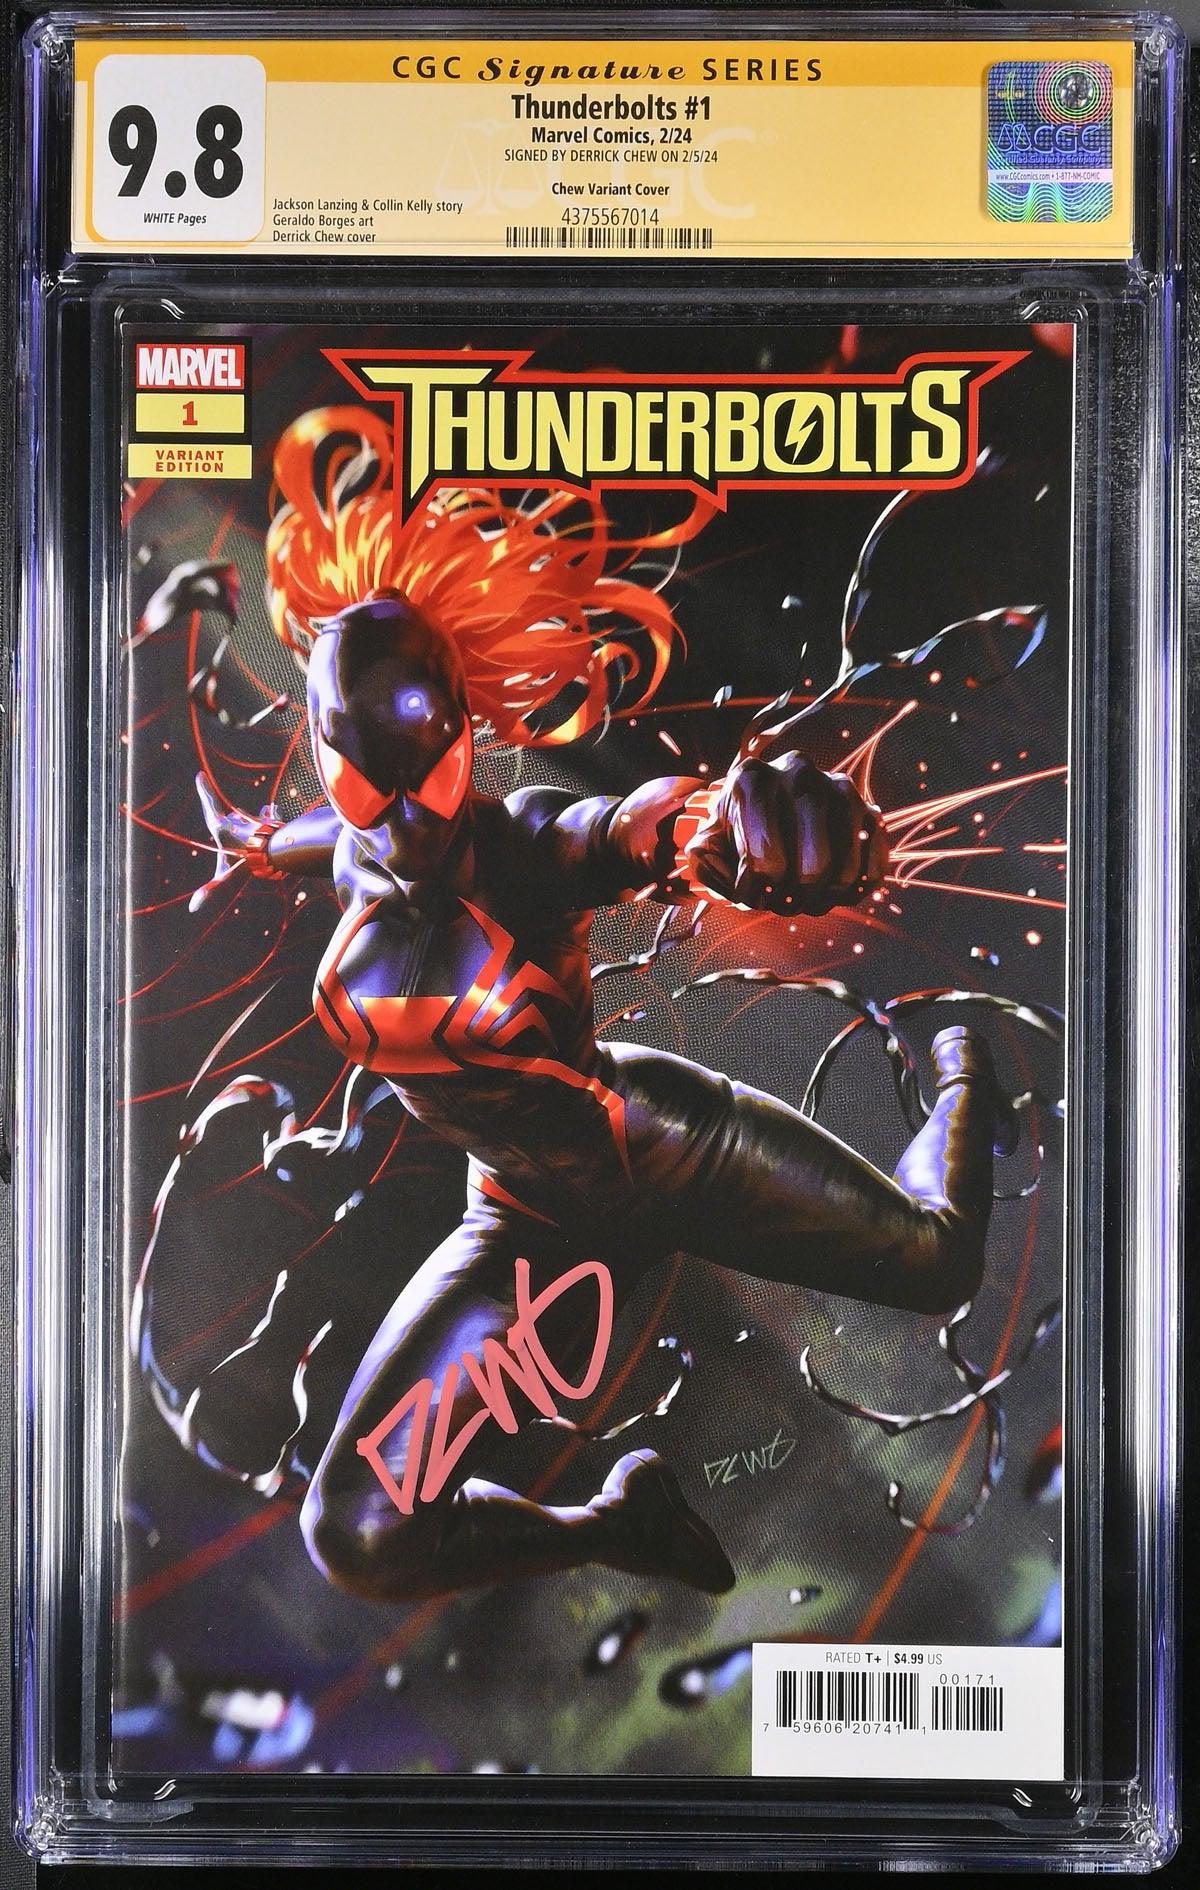 CGC THUNDERBOLTS VOL 5 #1 CHEW VARIANT (9.8) SIGNATURE SERIES - SIGNED BY DERRICK CHEW - Kings Comics